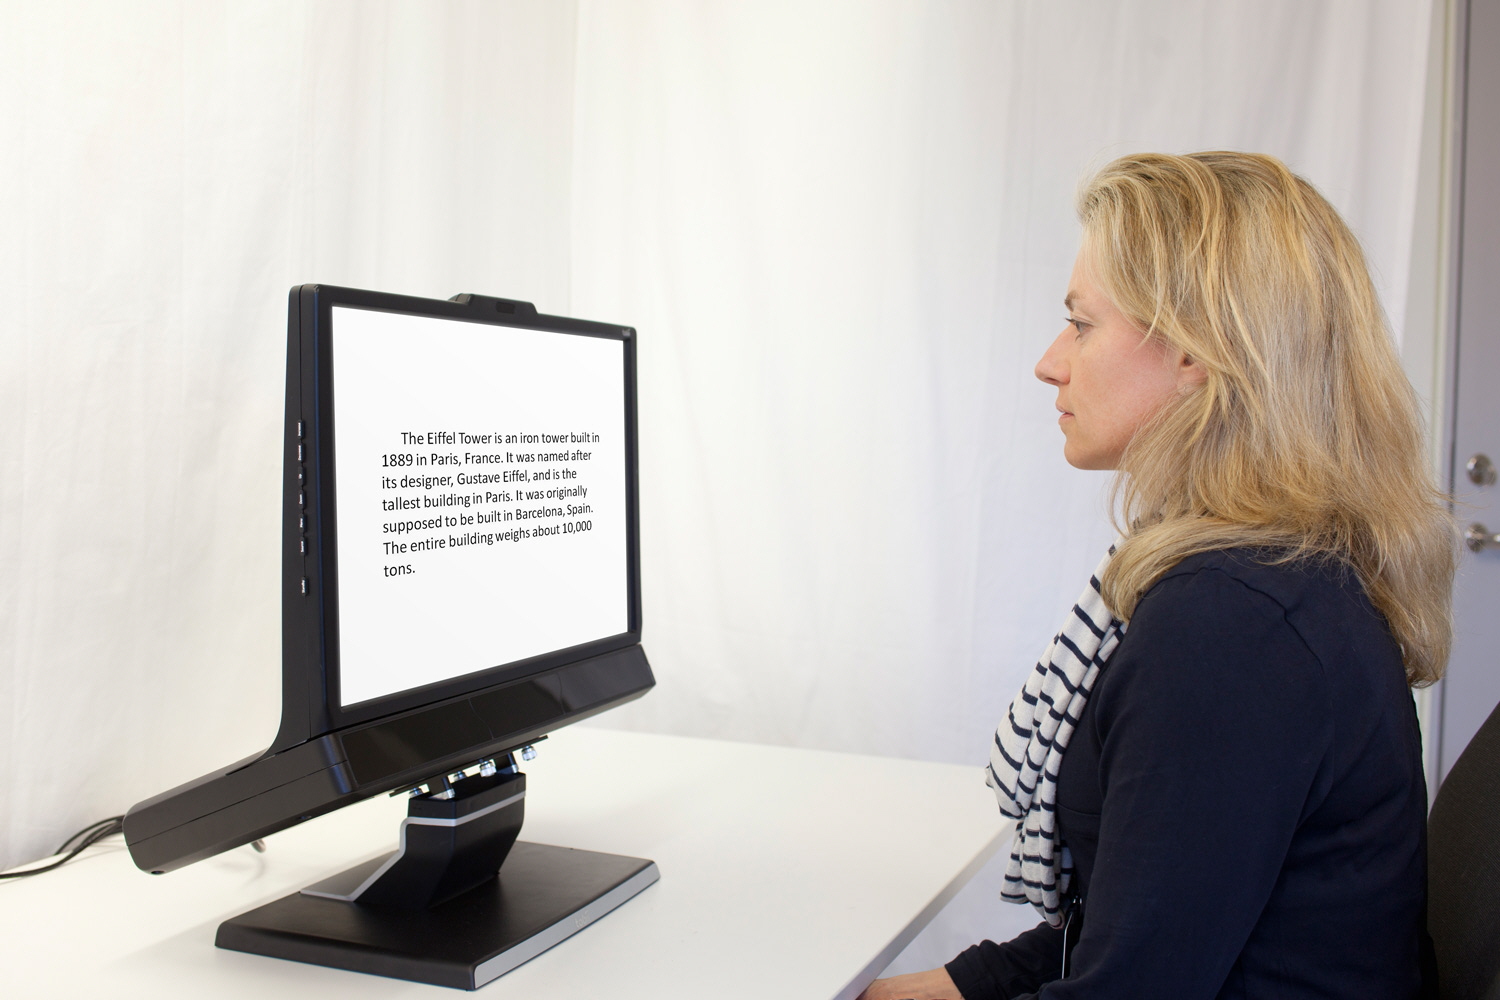 A woman reading a text displayed on the screen of the Tobii Pro TX300